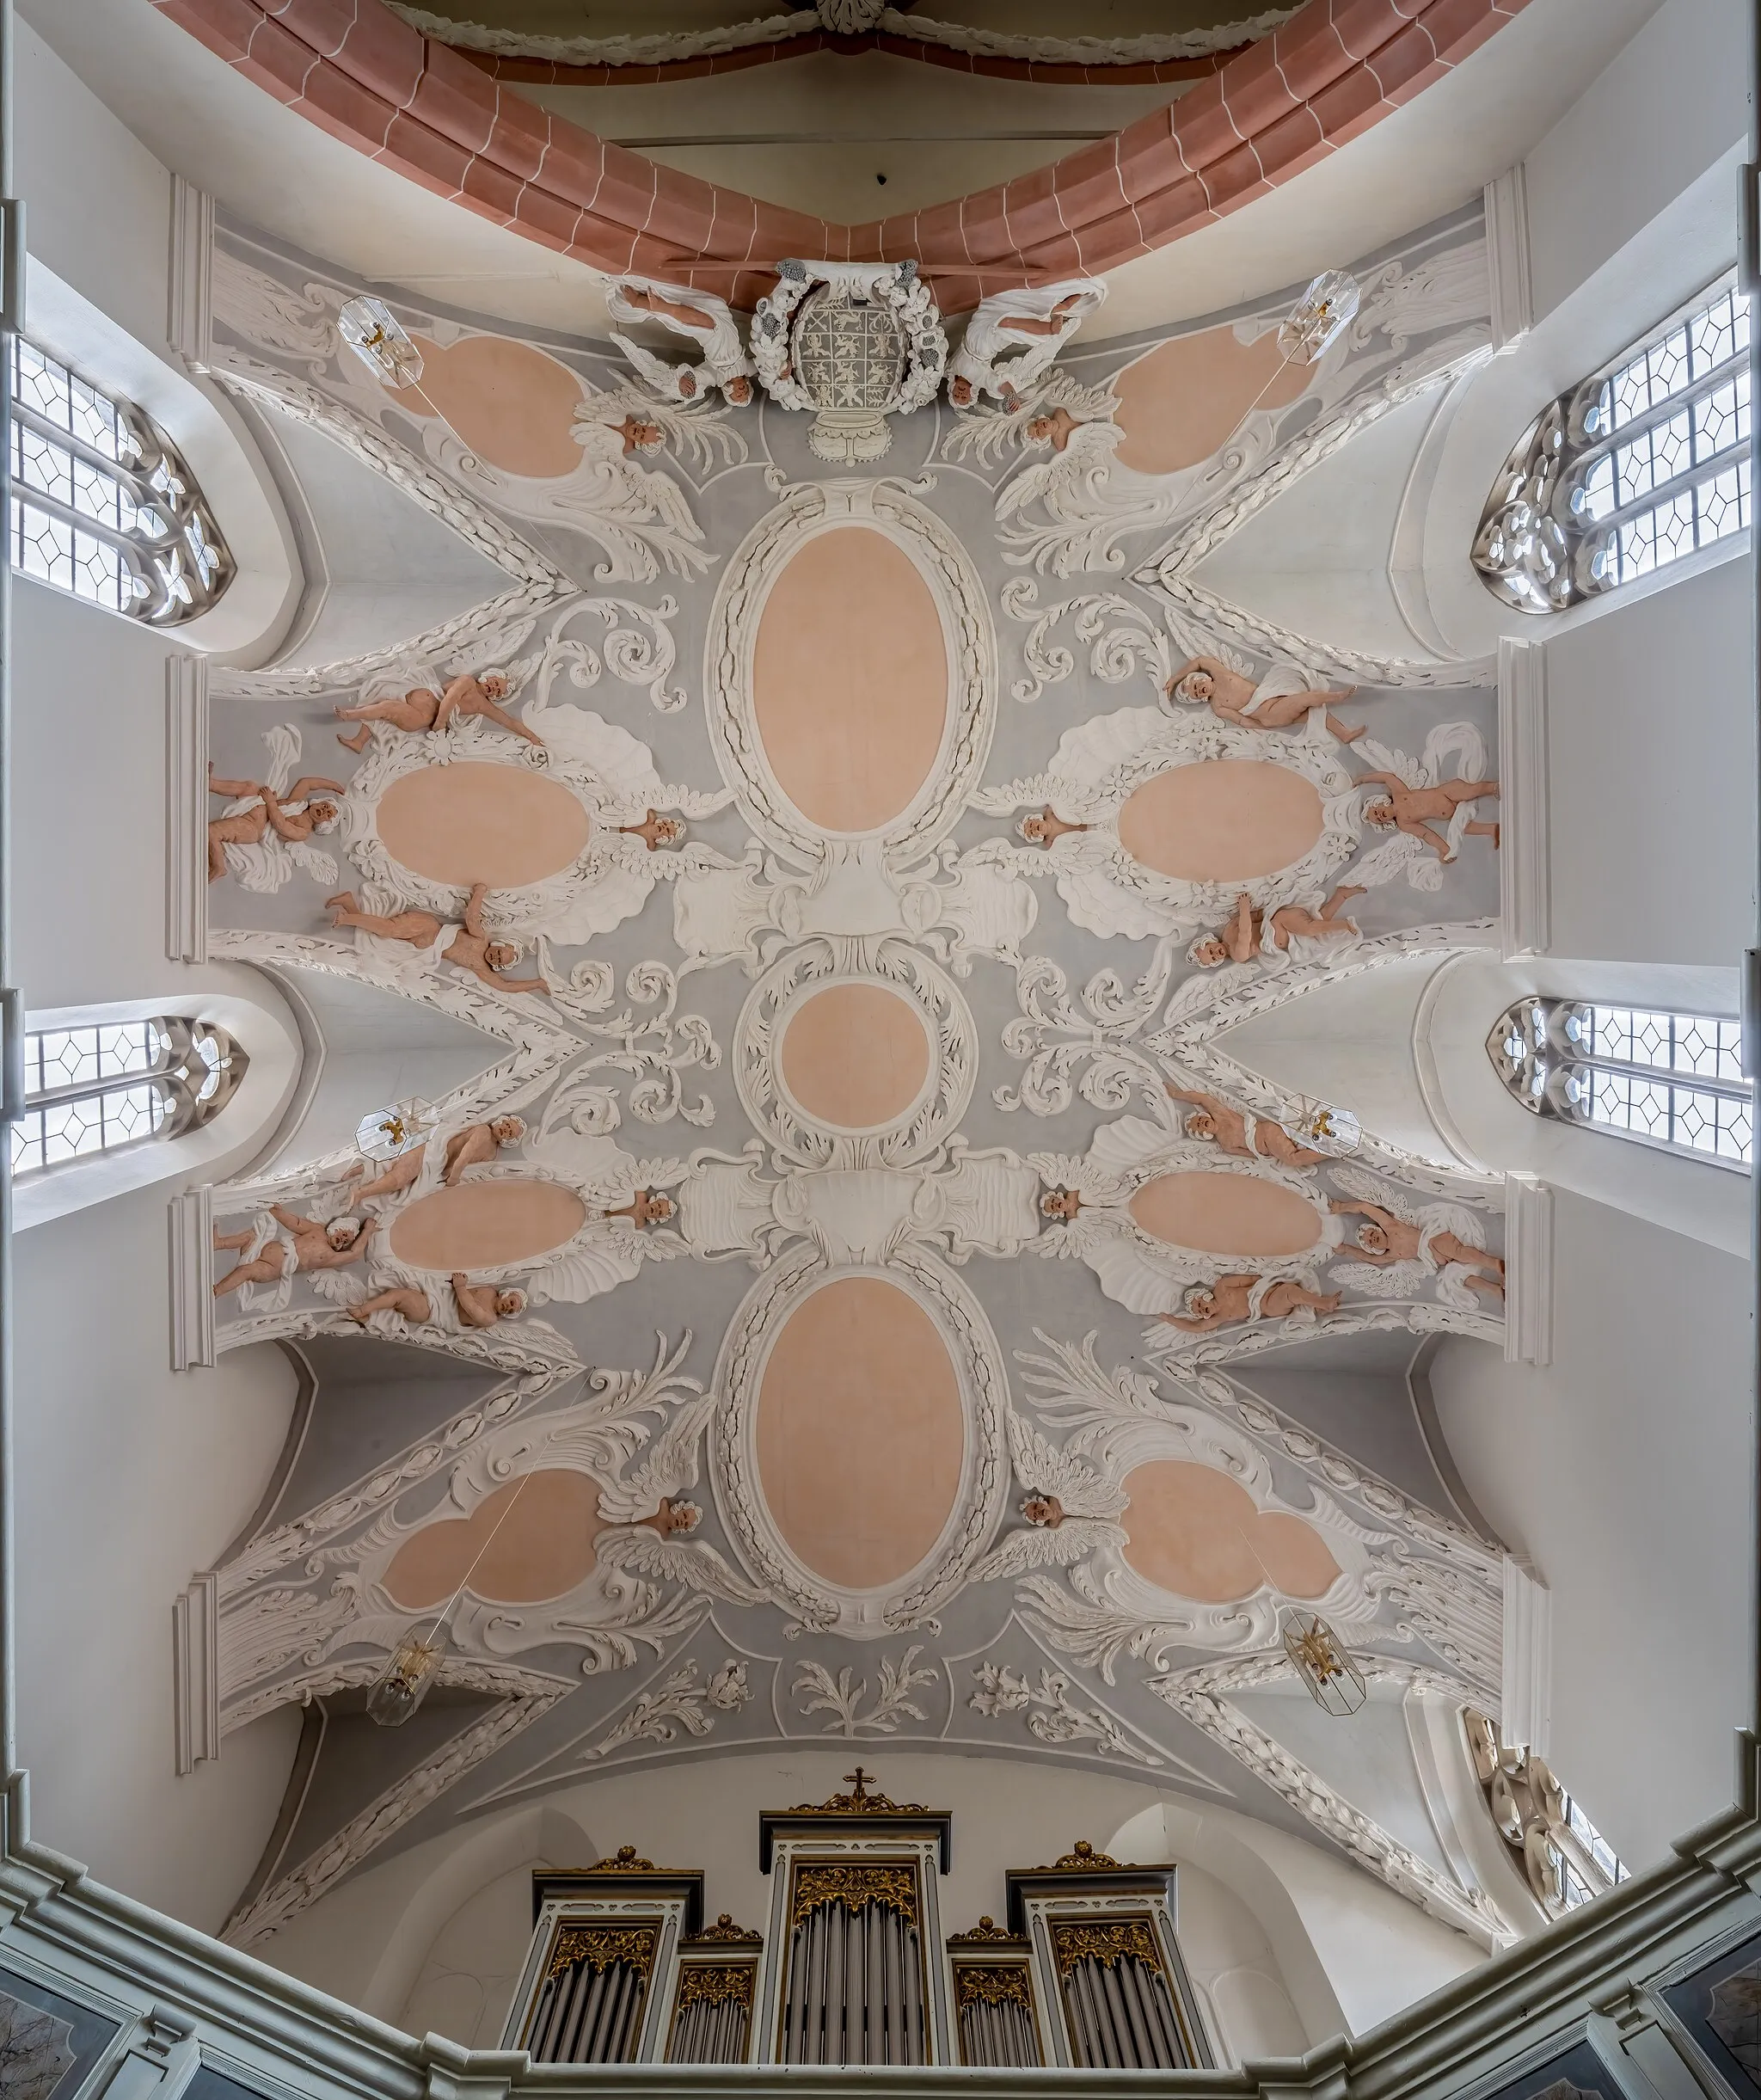 Photo showing: Ceiling of Himmelkron Monastery Church